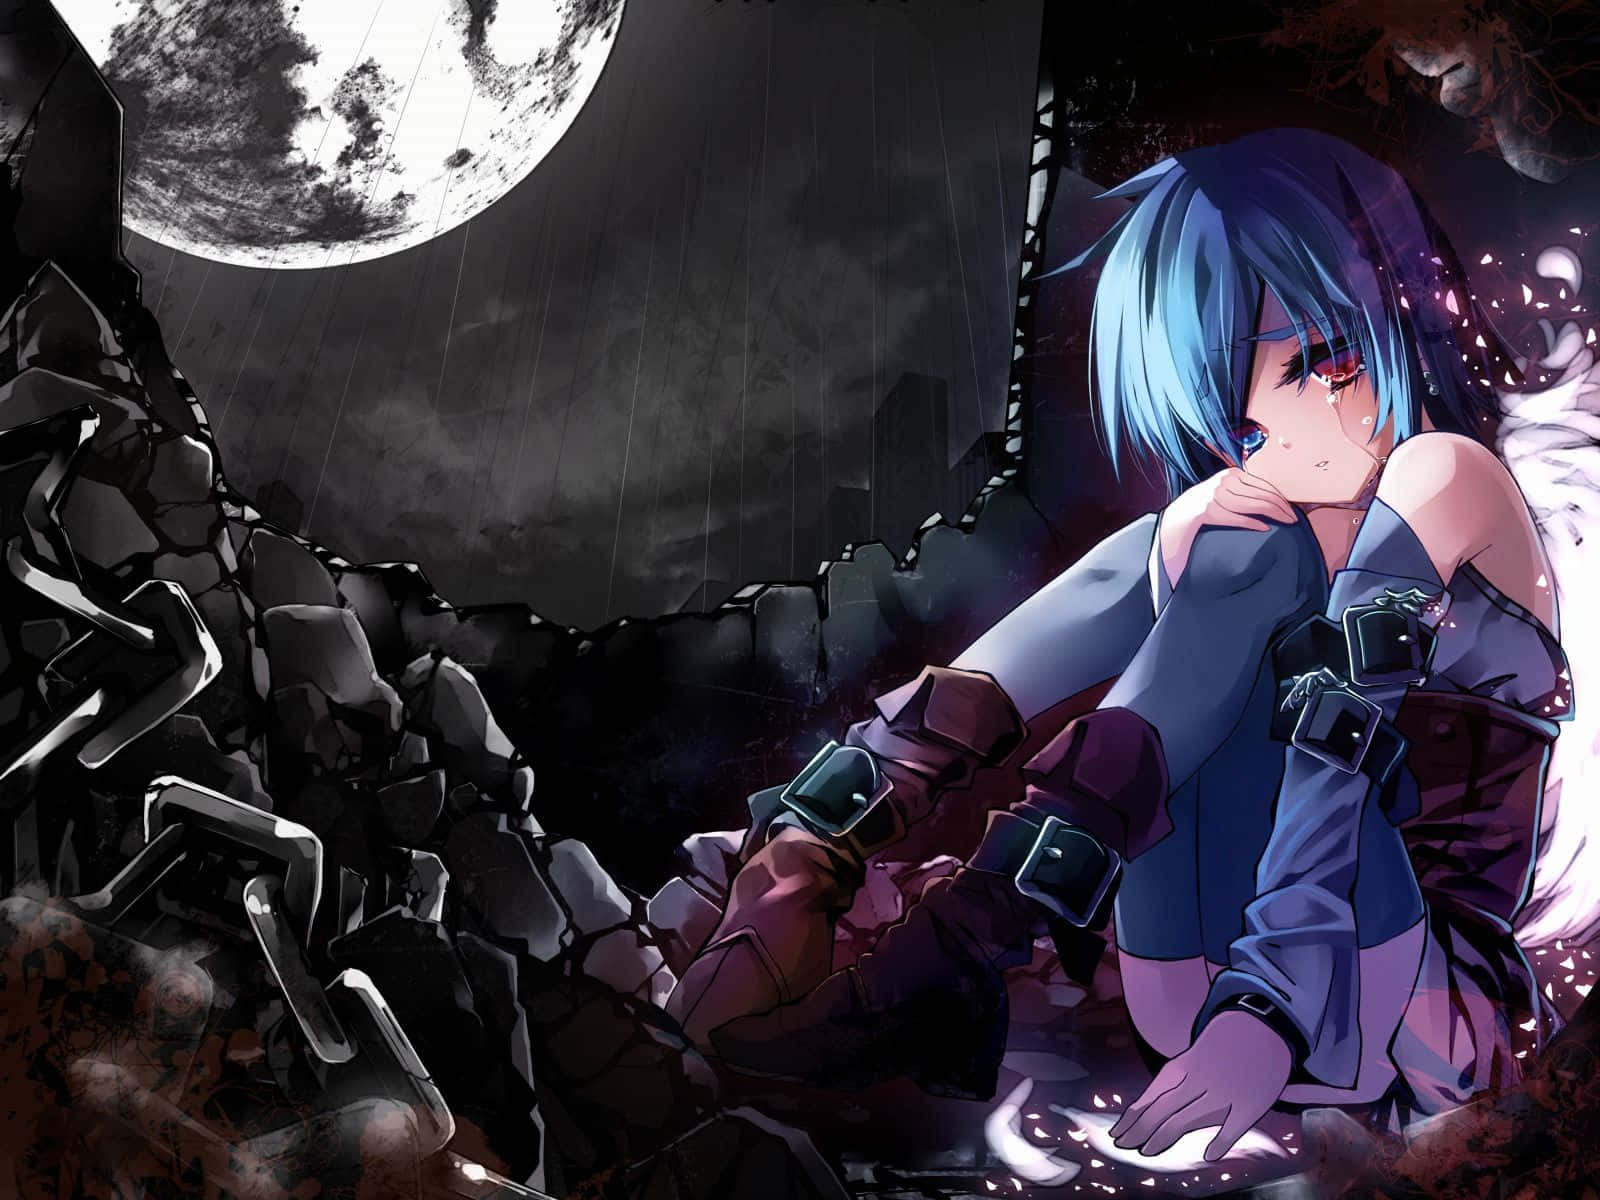 Experience a captivating Gothic Anime night, full of mystery and wonder. Wallpaper